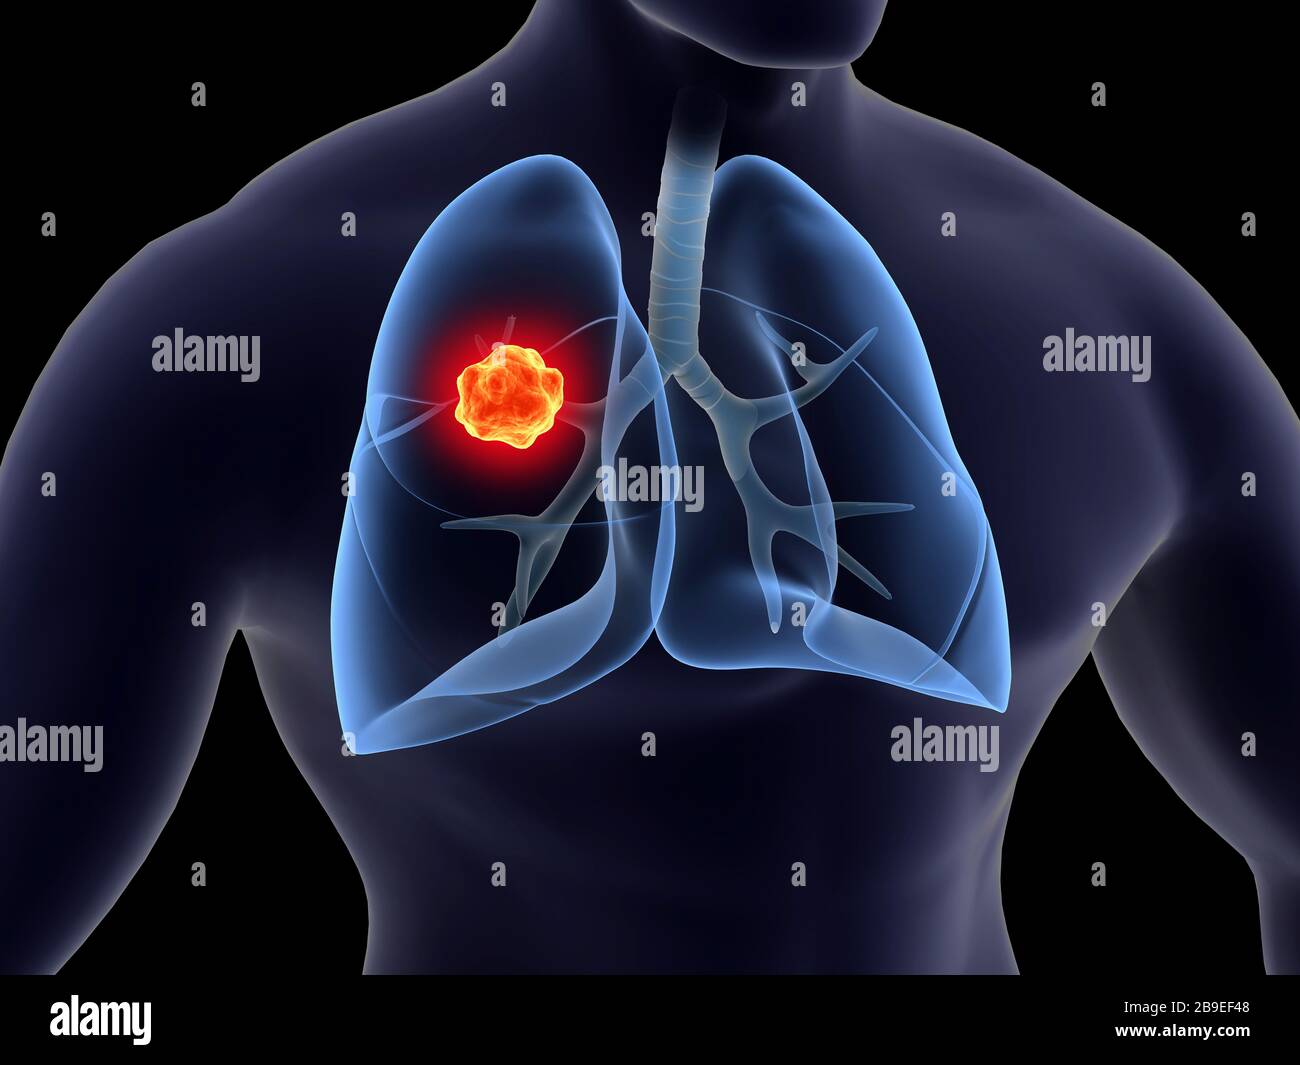 Medical illustration of lung cancer inside the human lungs. Stock Photo